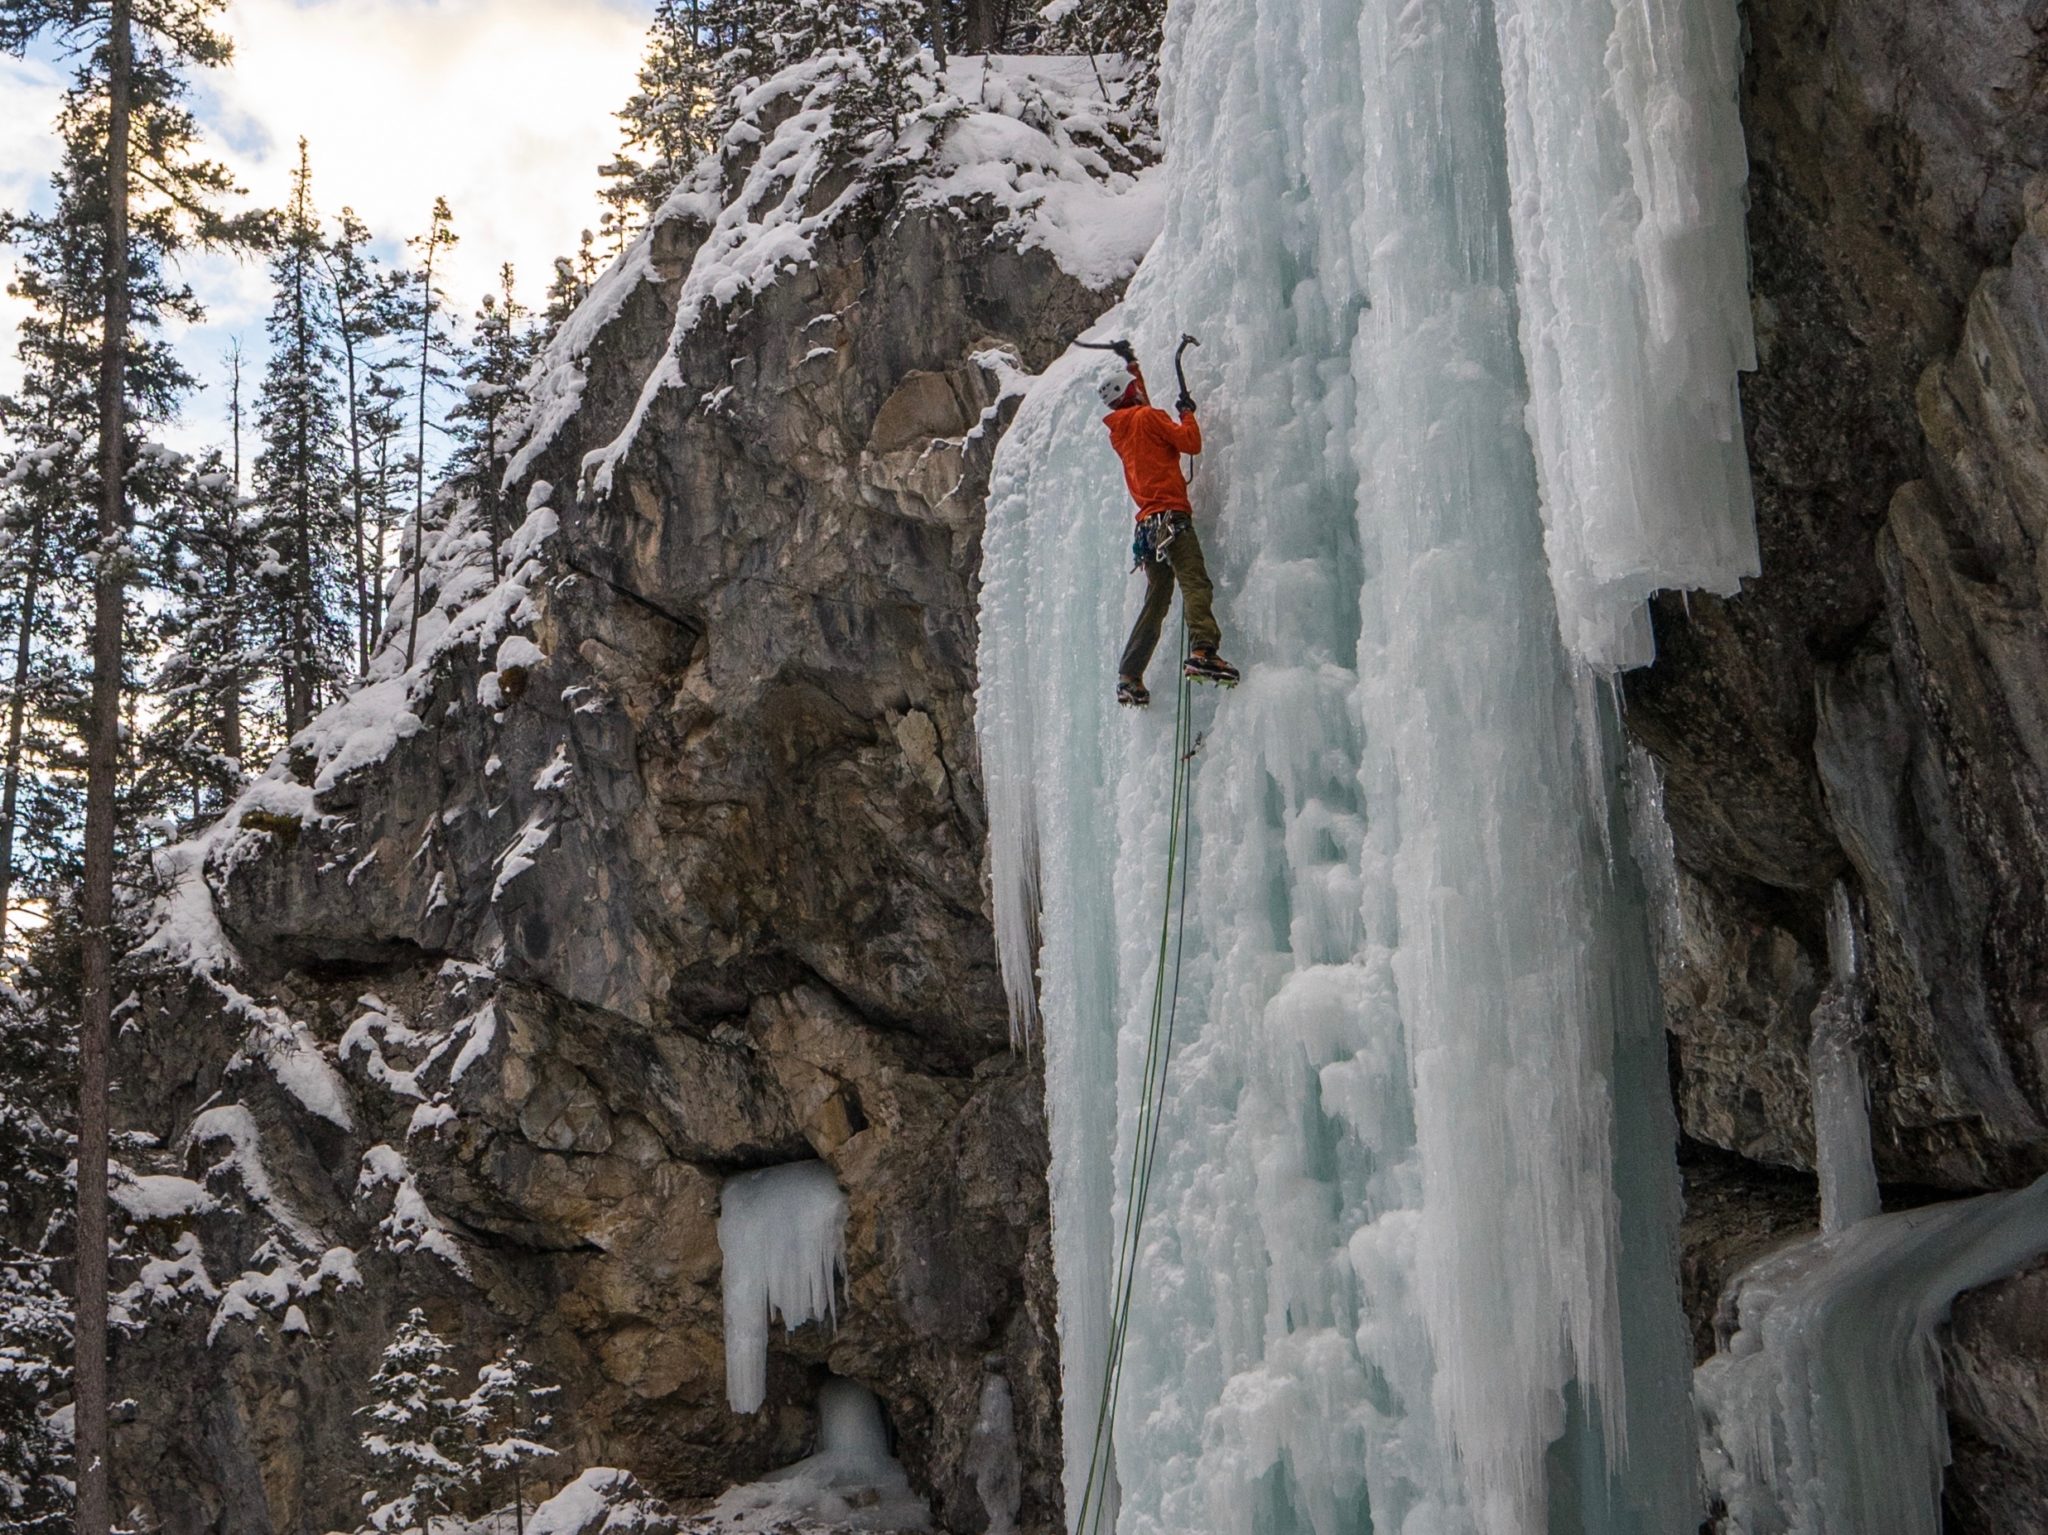 Learning to lead ice climbs with guide Jay Mills